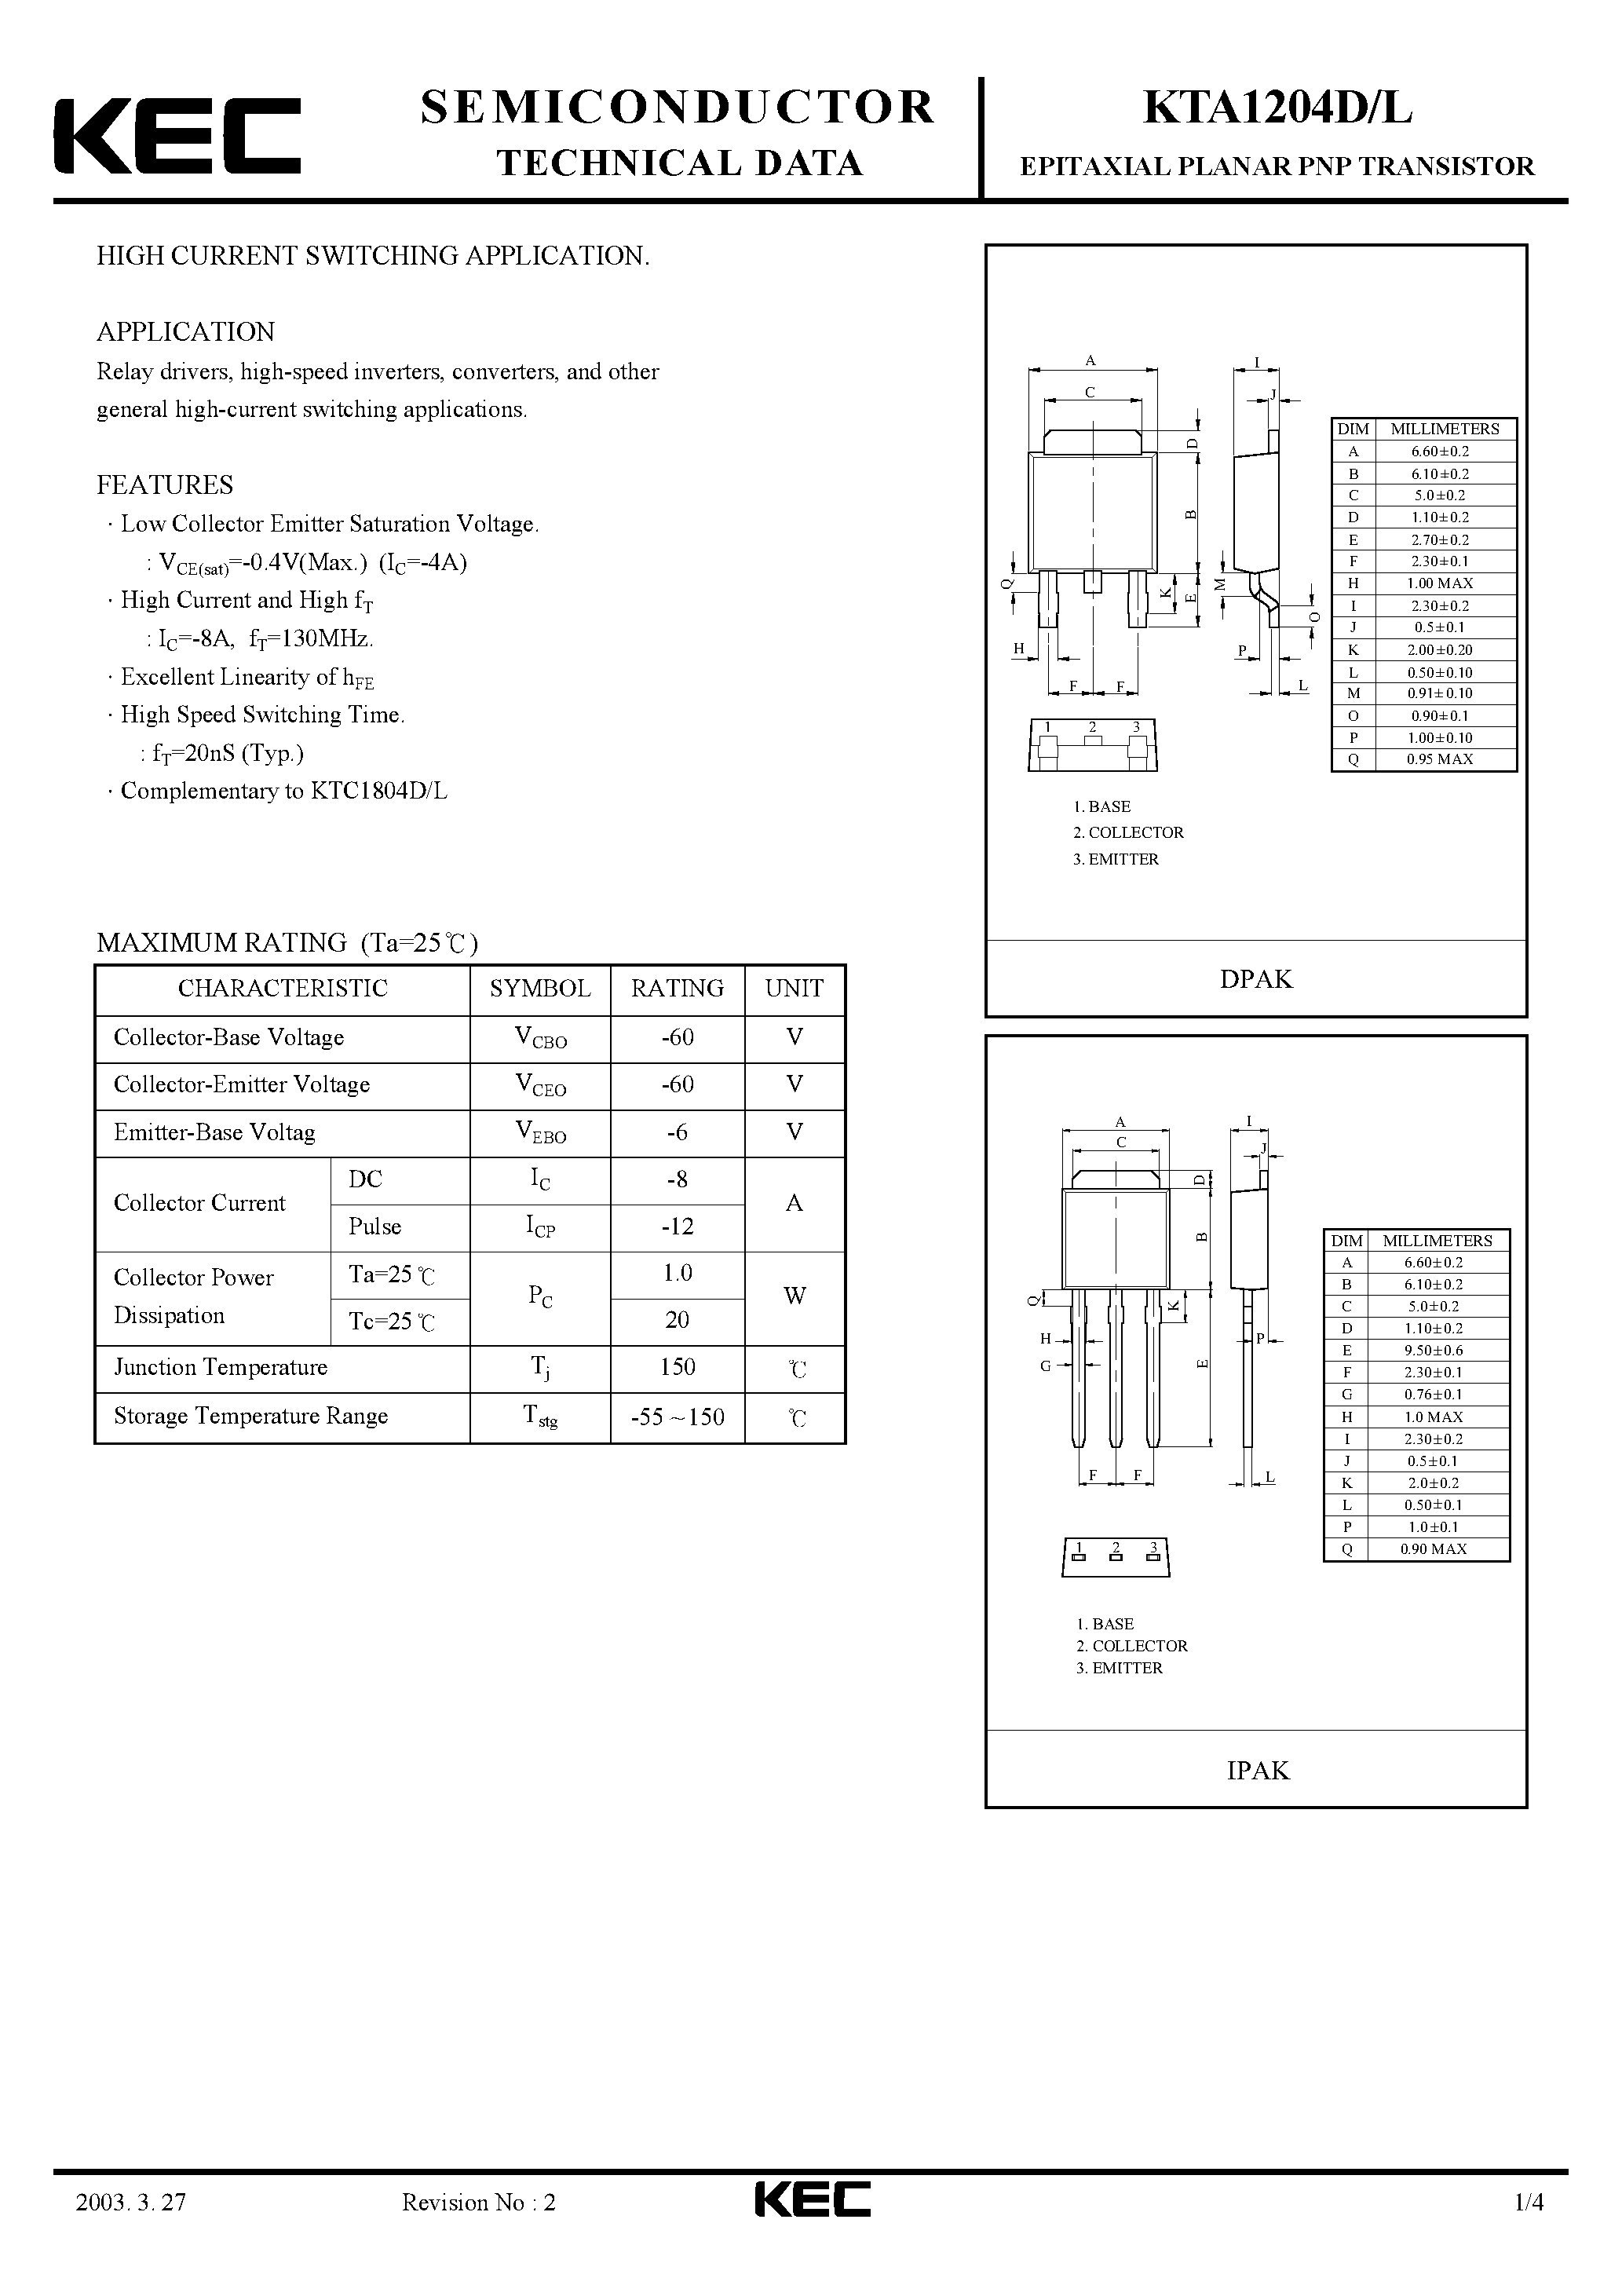 Datasheet KTA1204 - EPITAXIAL PLANAR PNP TRANSISTOR (HIGH CURRENT SWITCHING) page 1